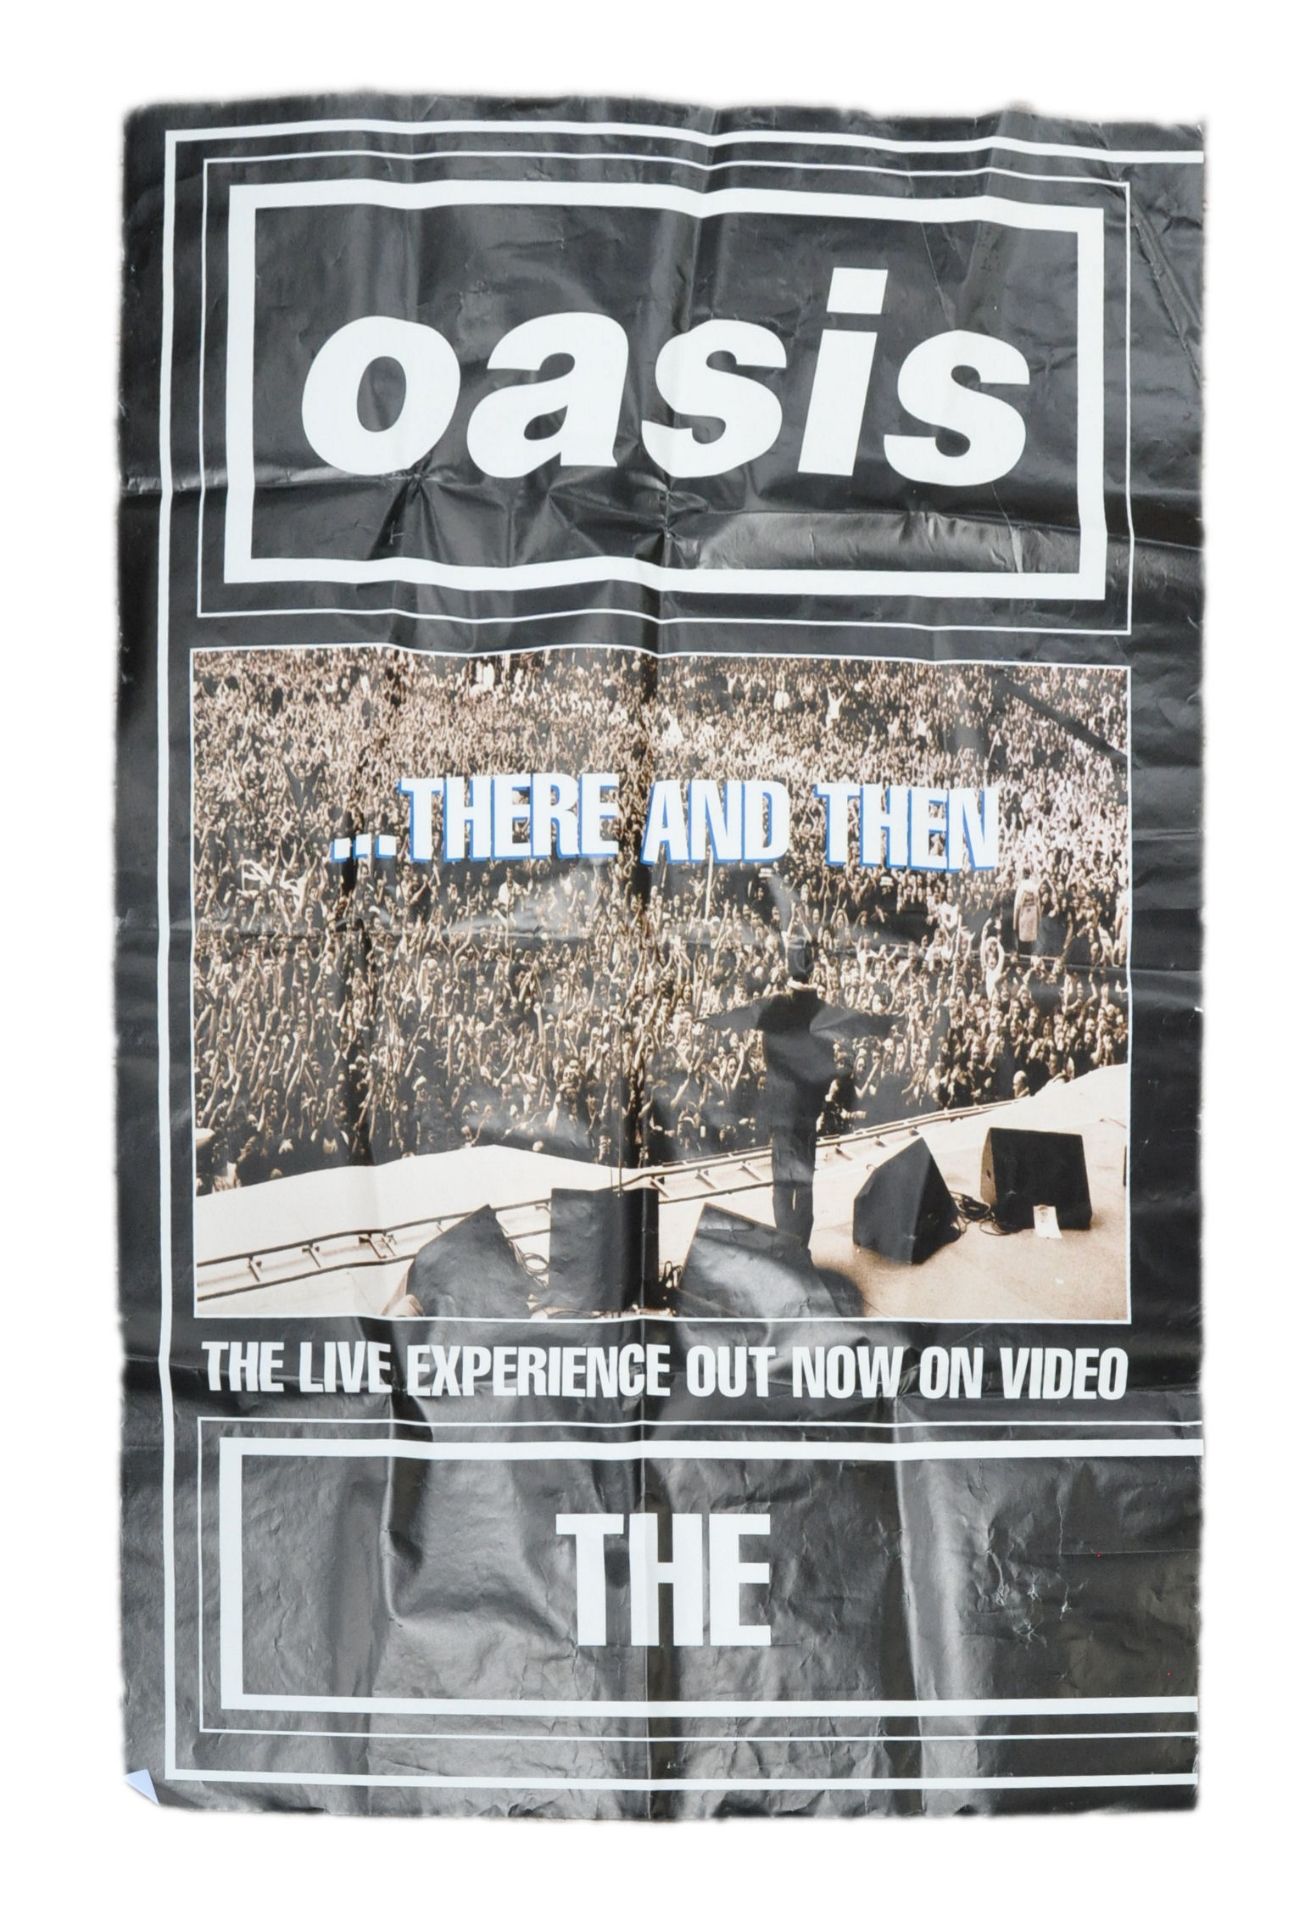 OASIS - COLLECTION OF ASSORTED MEMORABILIA - Image 3 of 9